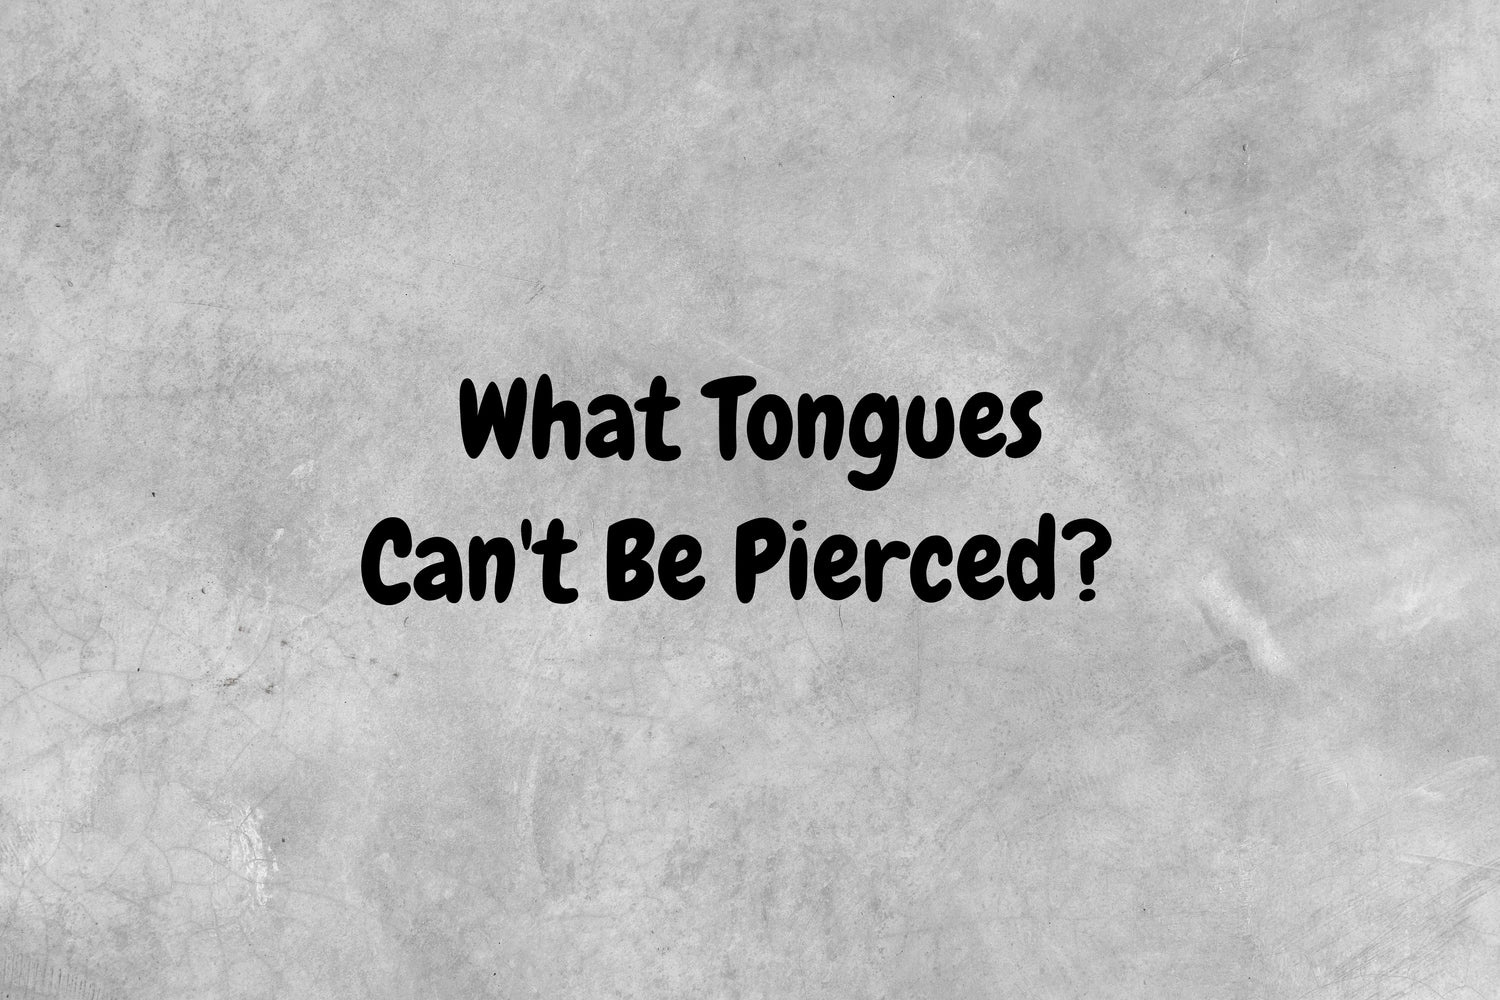 An image with a gray background and black text that asks the question, "What tongues can't be pierced?"